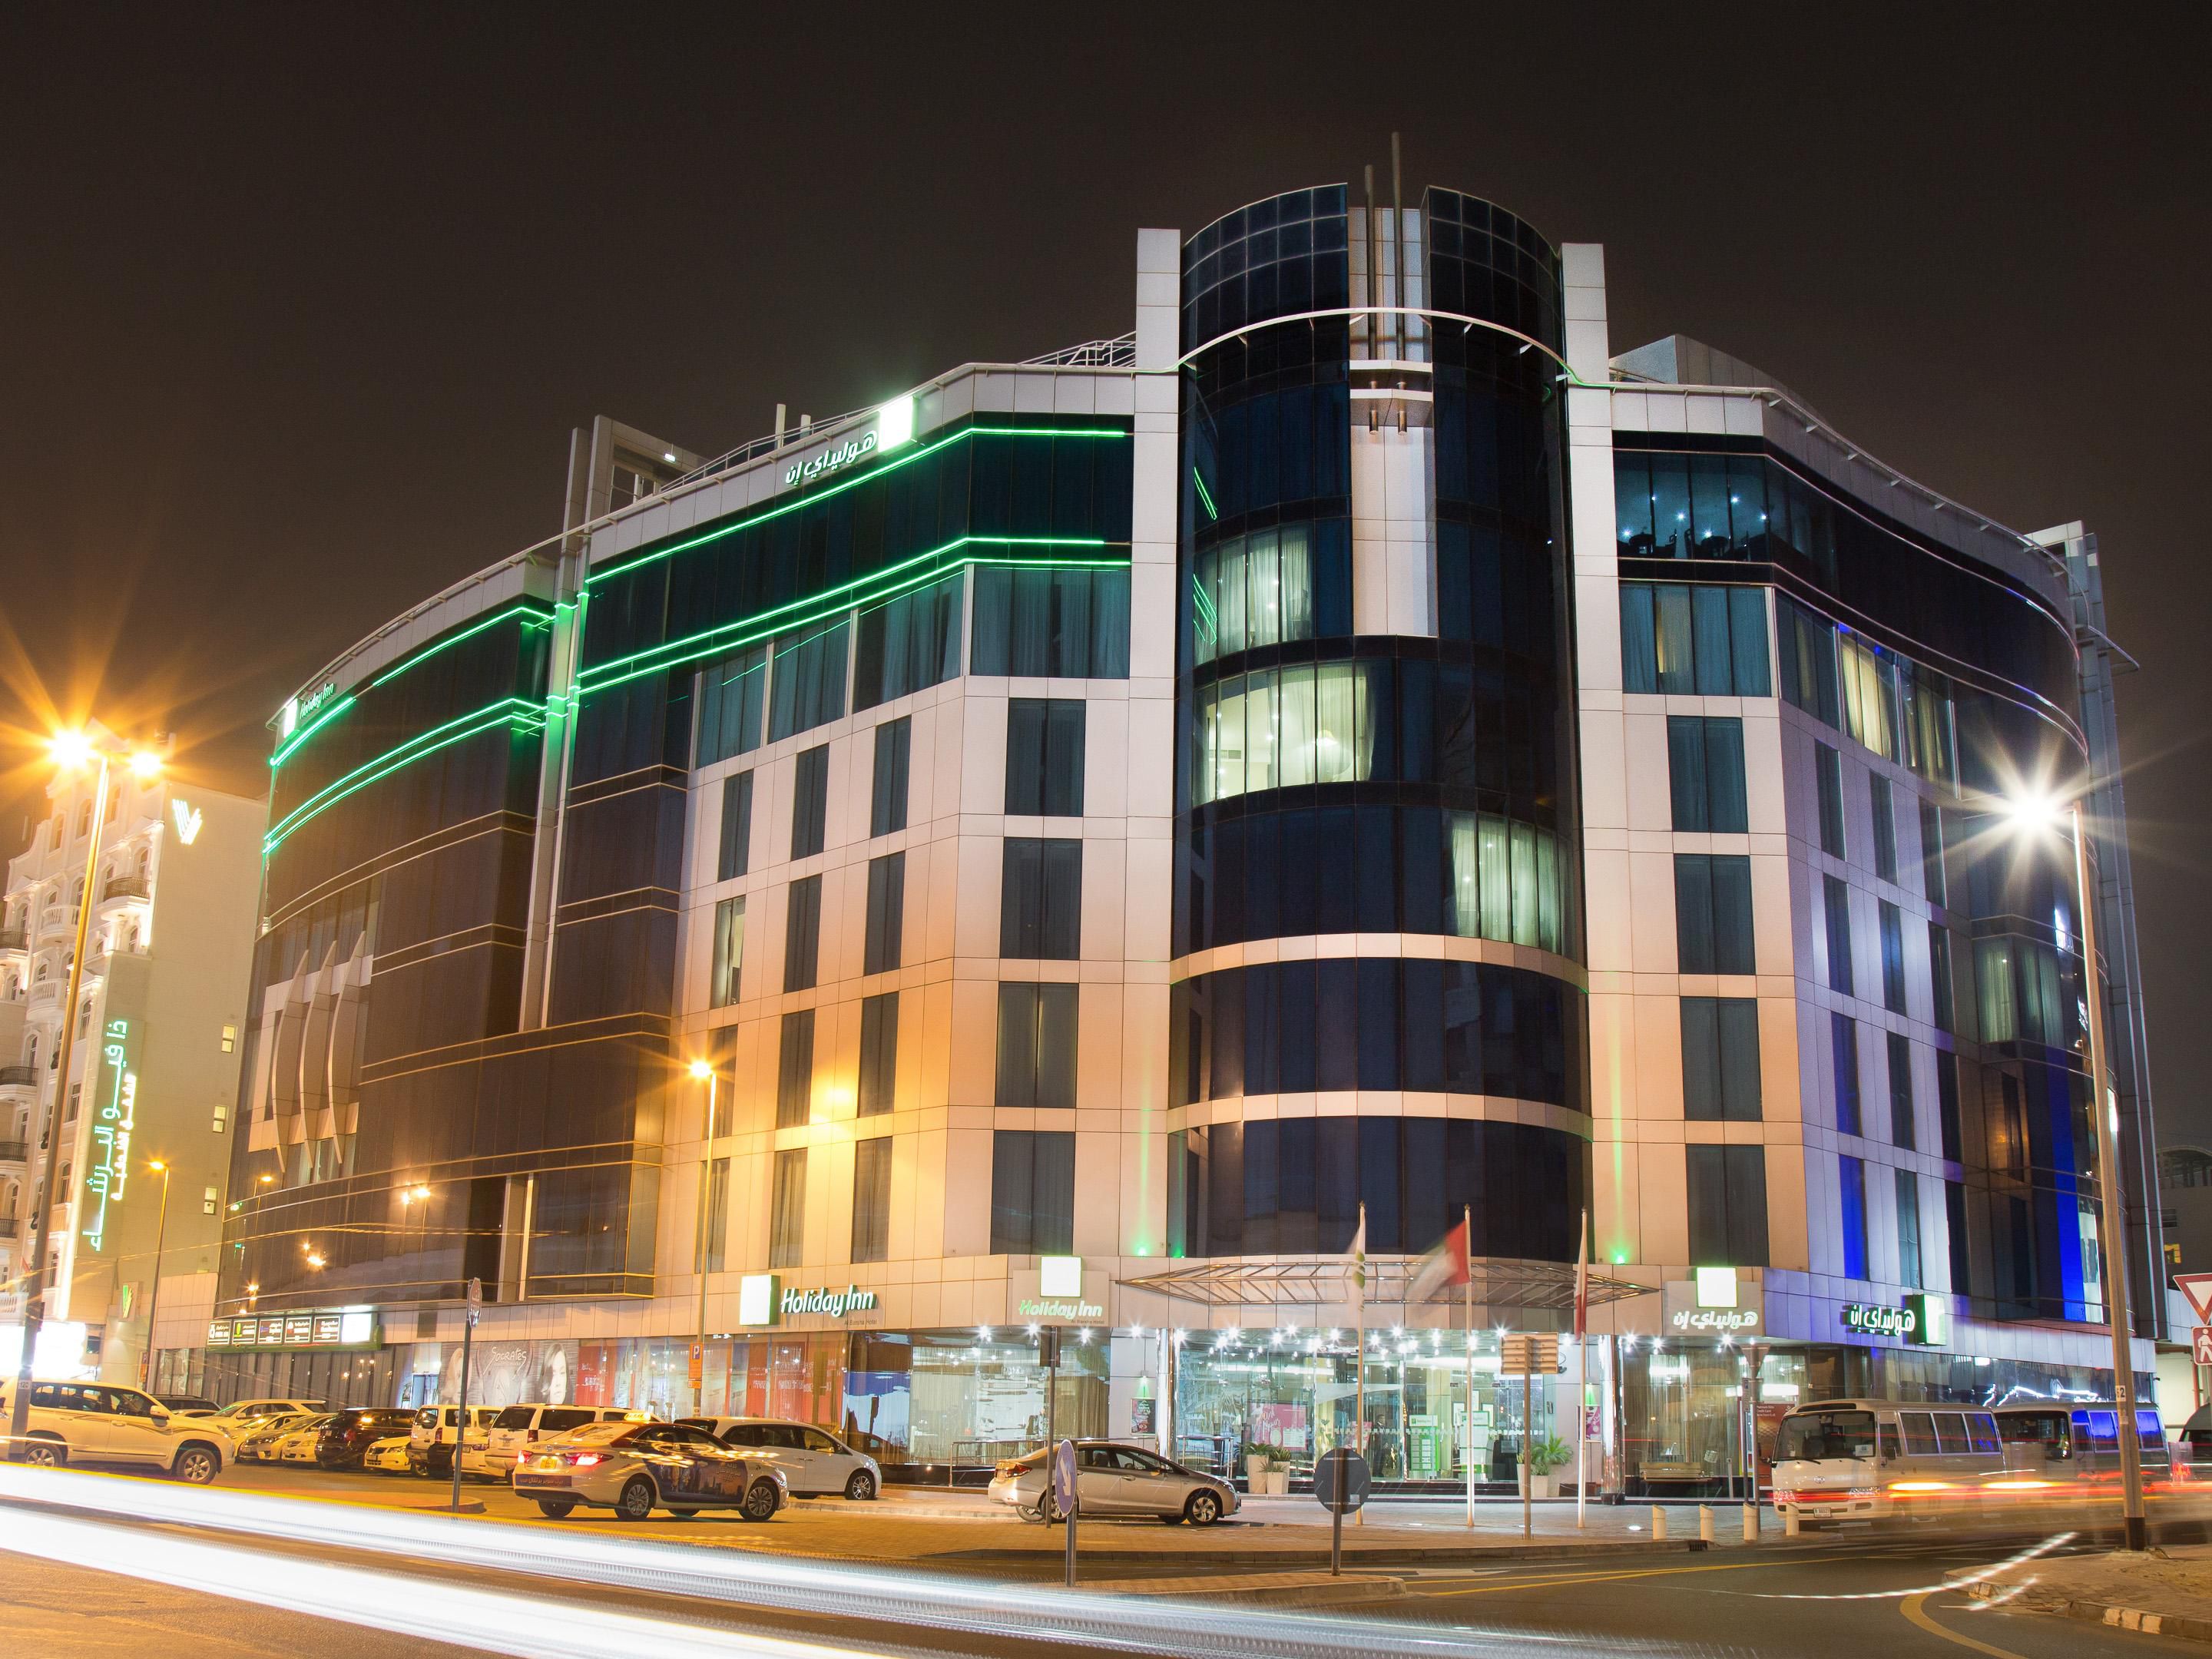 Holiday Inn Dubai – Al Barsha is located near Sheikh Zayed Road so it’s an ideal hotel for travelers who are visiting Expo 2020. Our hotel is within a 3 minute walk to the Mashreq Metro Station which takes 25 minutes metro ride to the Expo 2020 site. We provide shuttle buses from hotel to the site. When driving to the site it is 20 mins away.